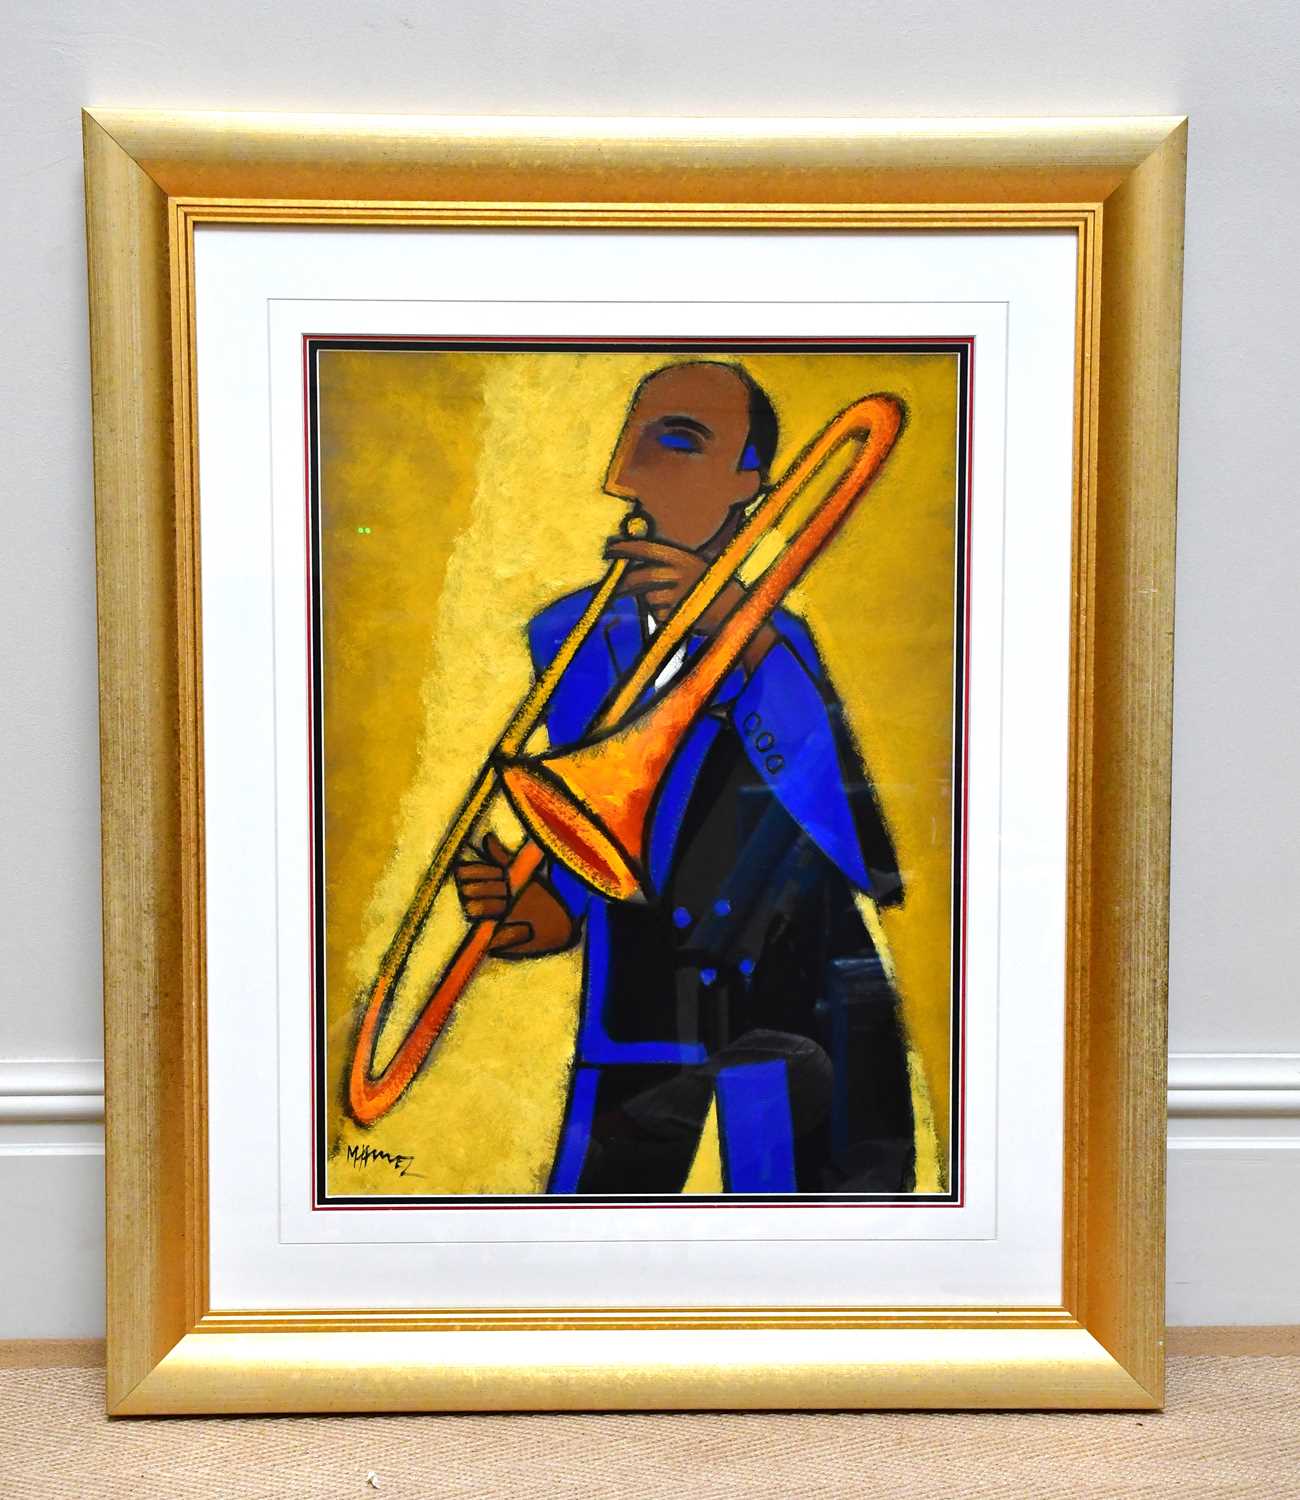 MARSHA HAMMEL; oil on gesso, 'In The Groove - 1937, Bone', signed, 60 x 45cm, framed and glazed.